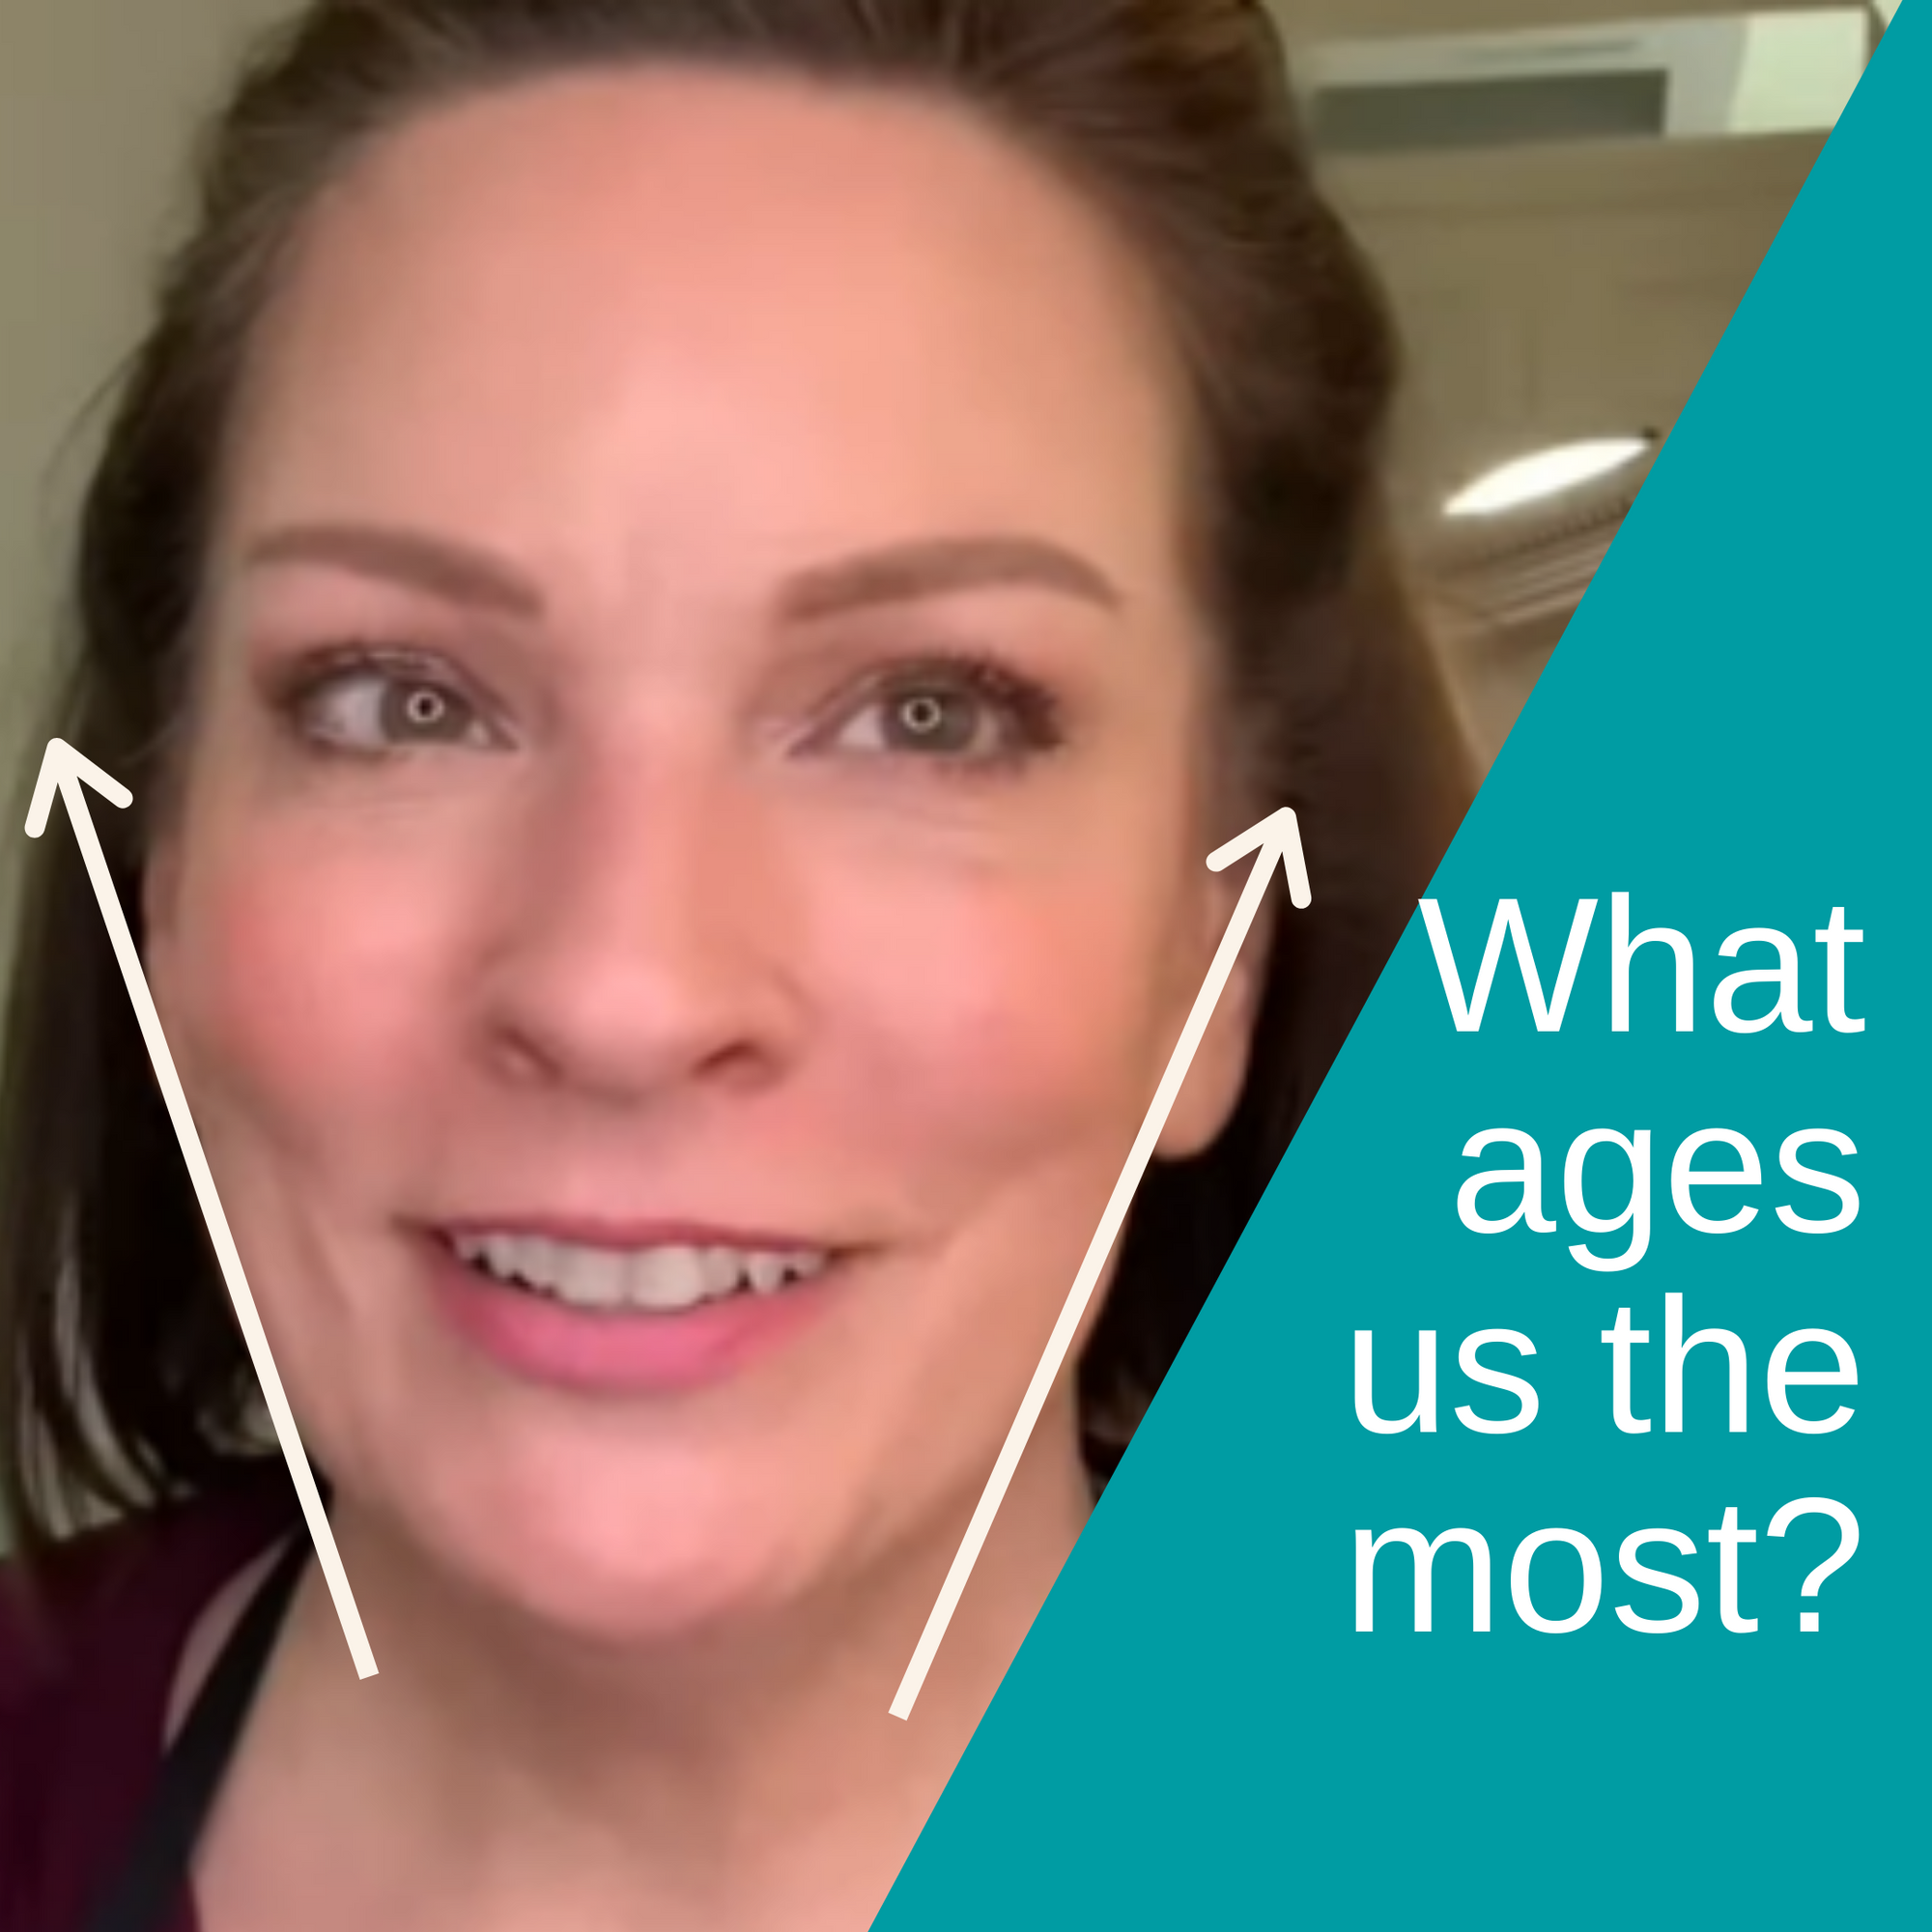 What Ages our Face the Most?